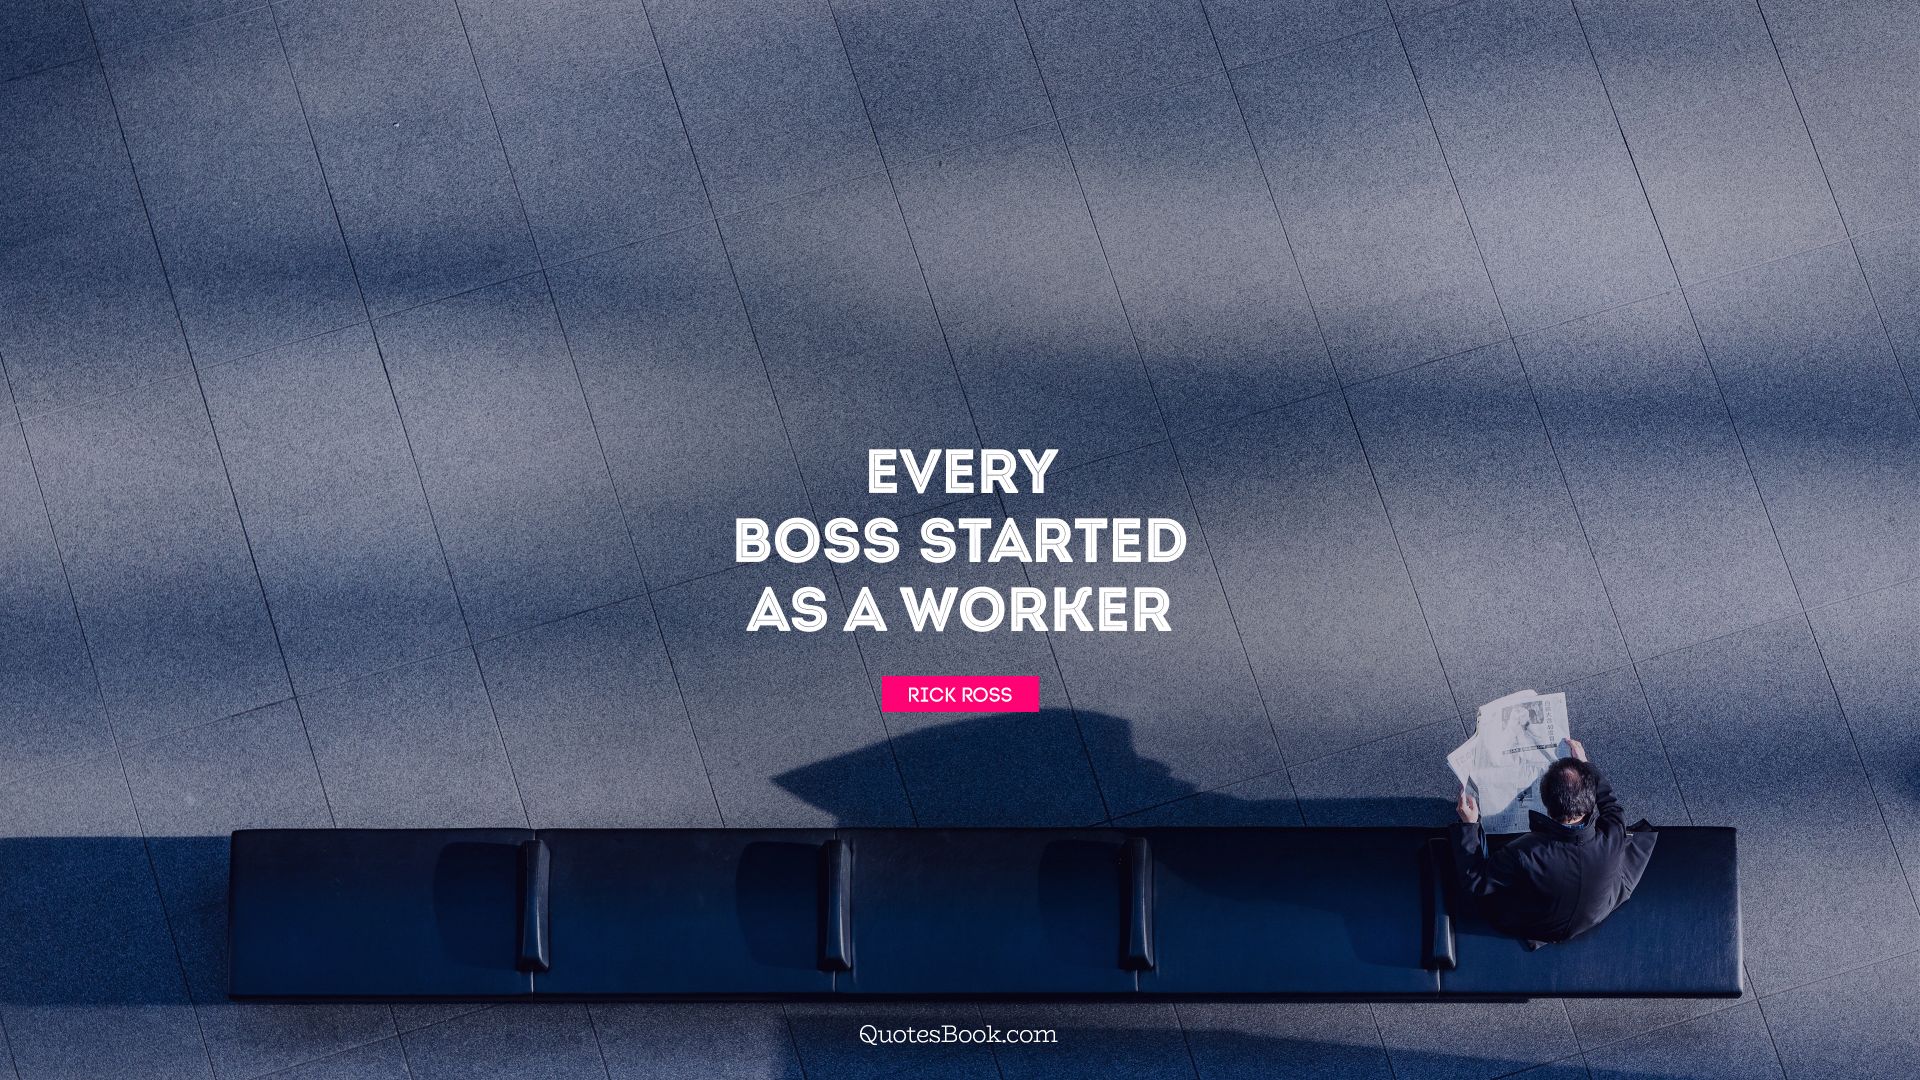 Every boss started as a worker. - Quote by Rick Ross